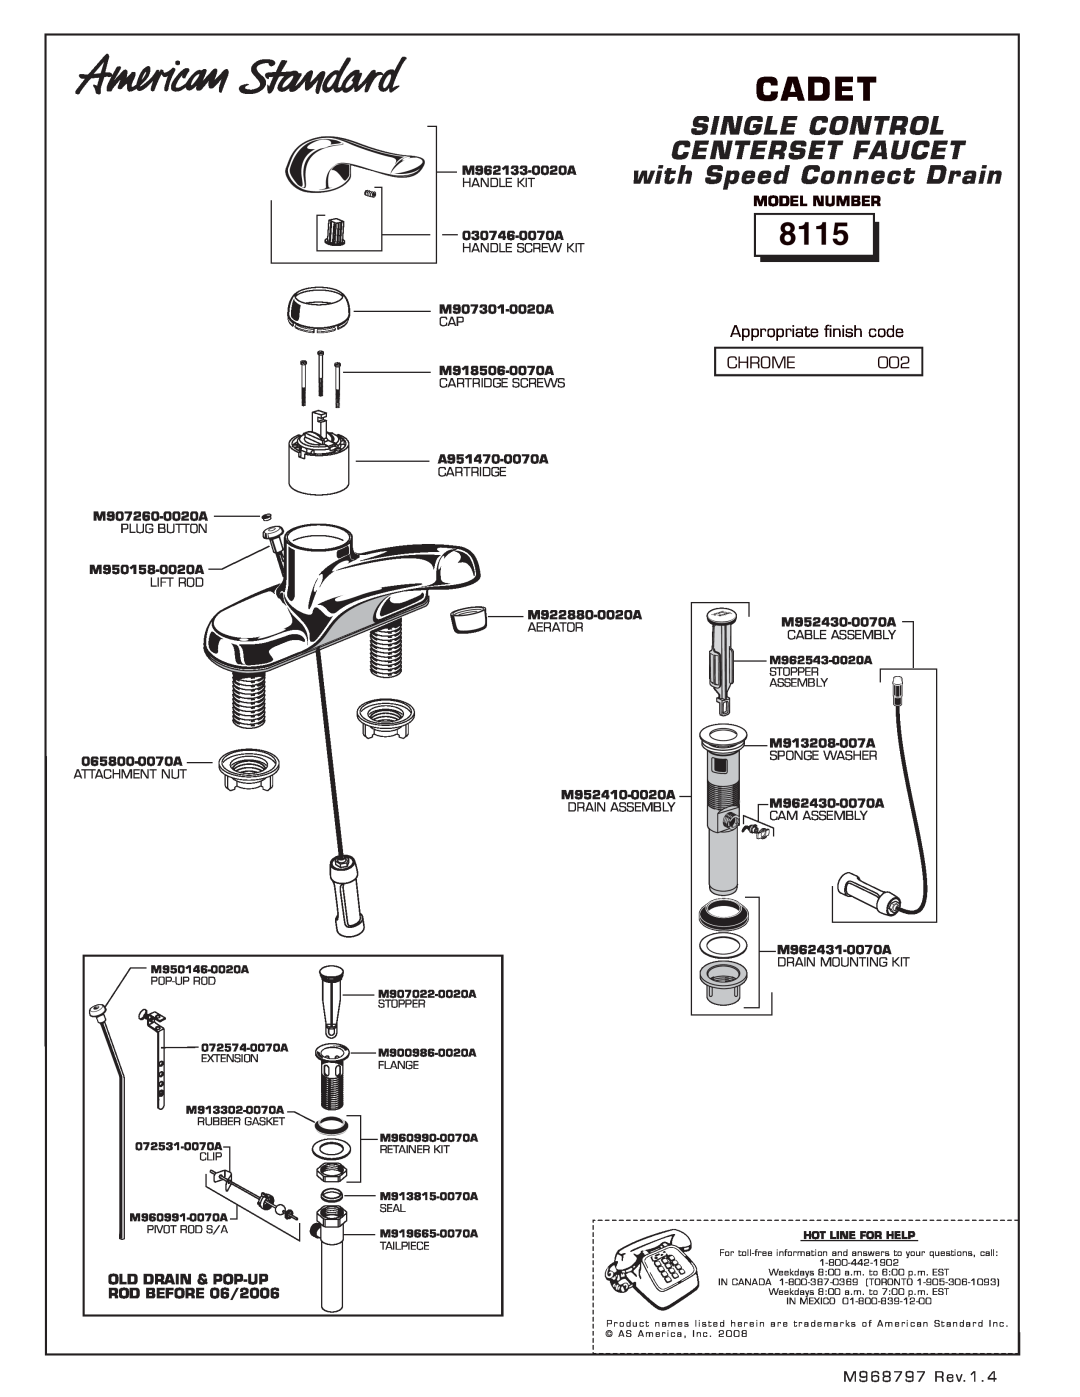 American Standard 8115 manual Cadet, Single Control, Centerset Faucet, with Speed Connect Drain, Model Number, Handle Kit 